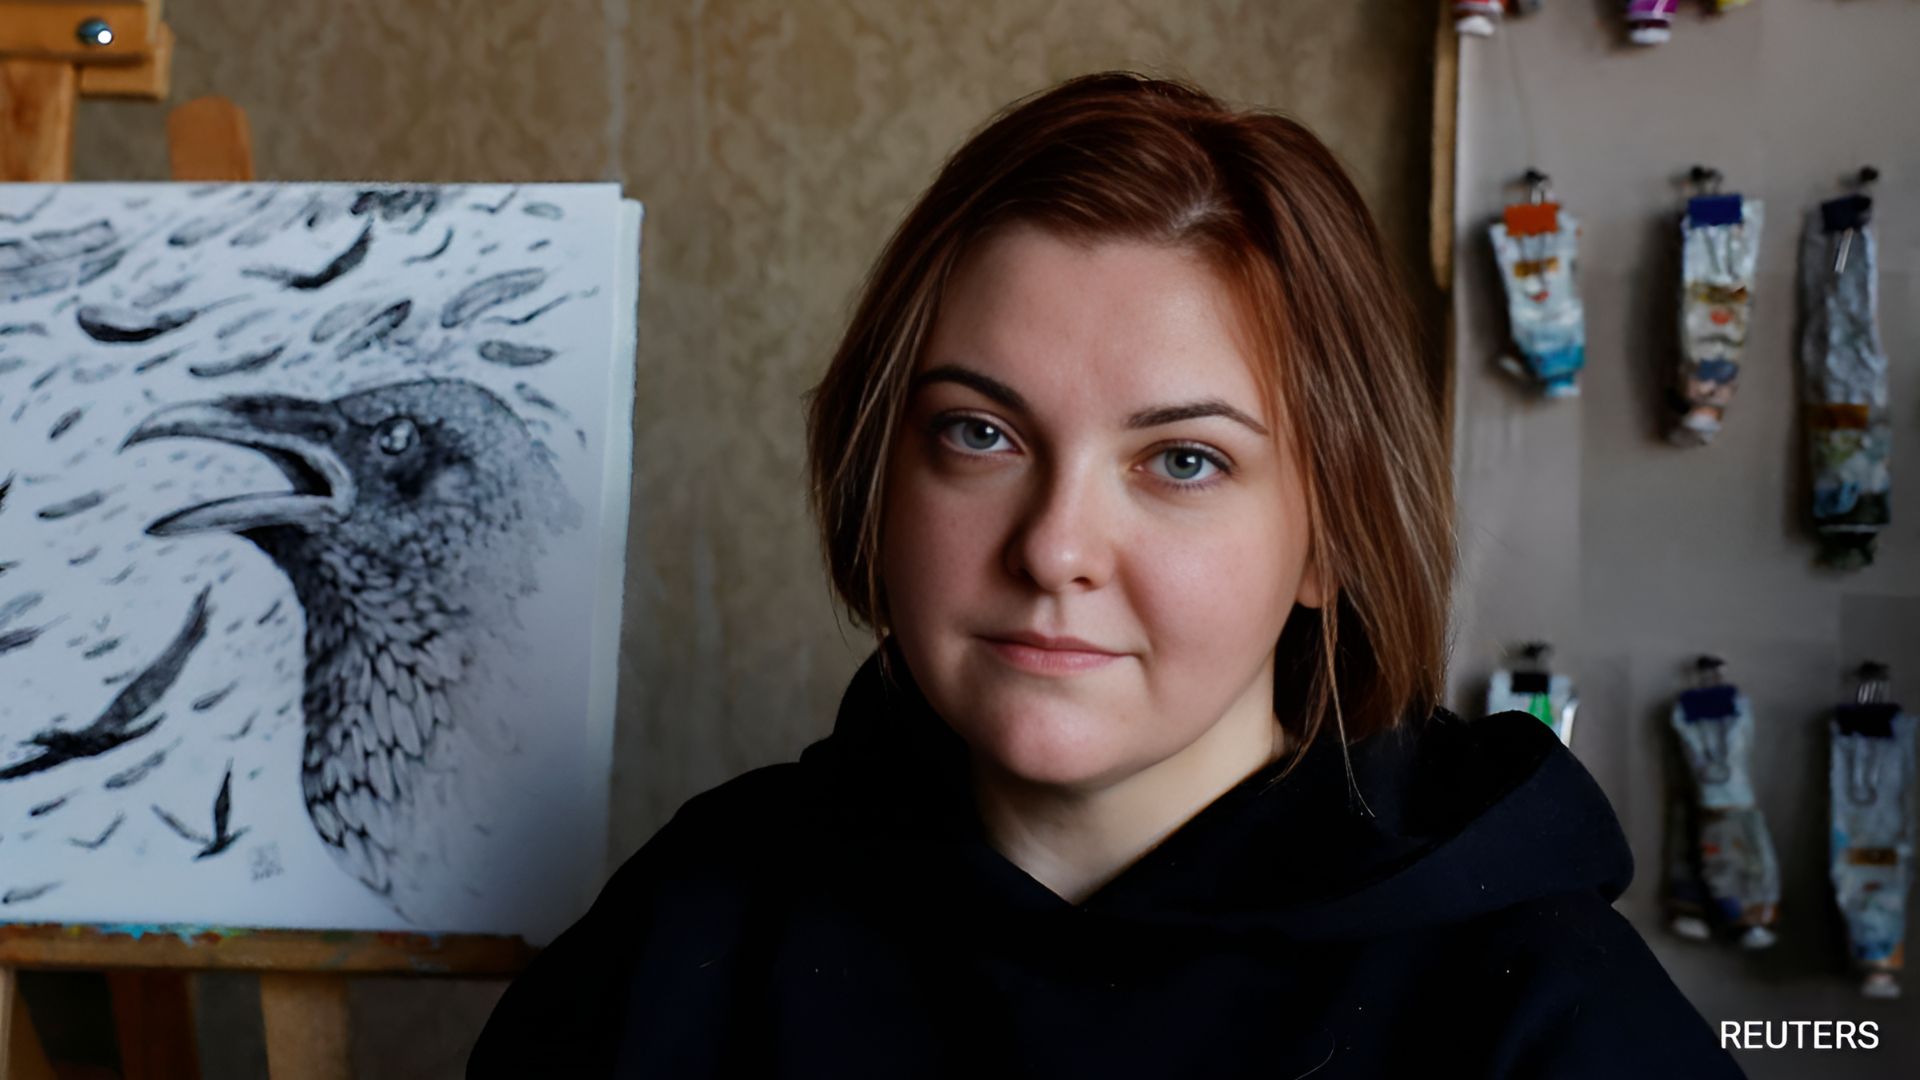 Russian Artist Survives Concert Shooting, Shares Harrowing Experience